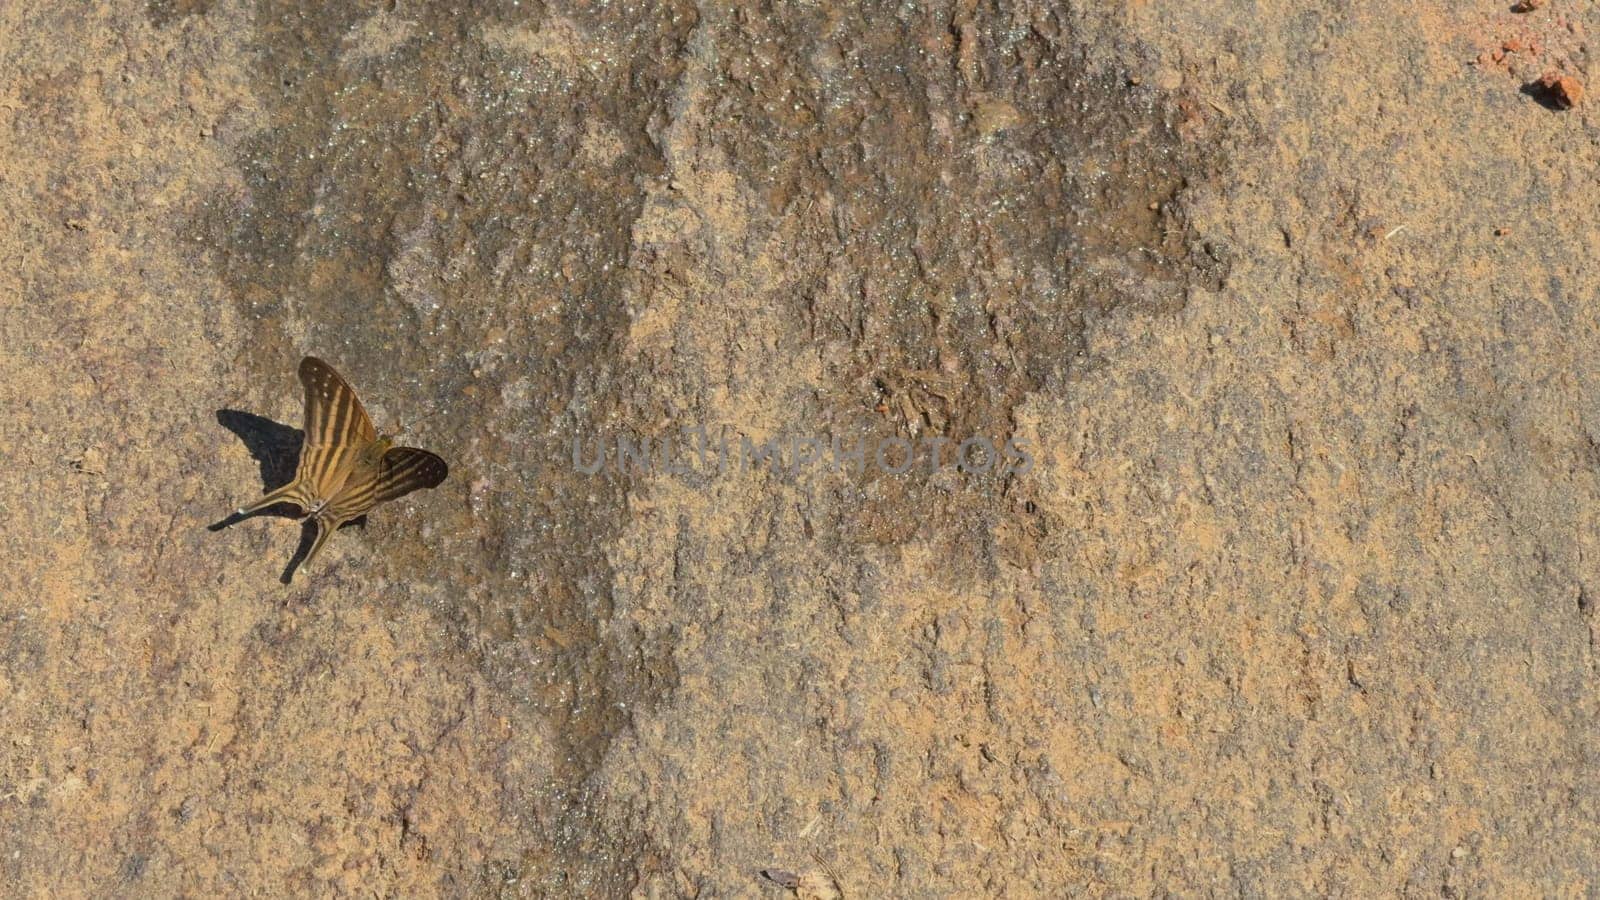 A close-up video shows a butterfly fluttering its wings and walking on a sunlit rock, leaving space for text.